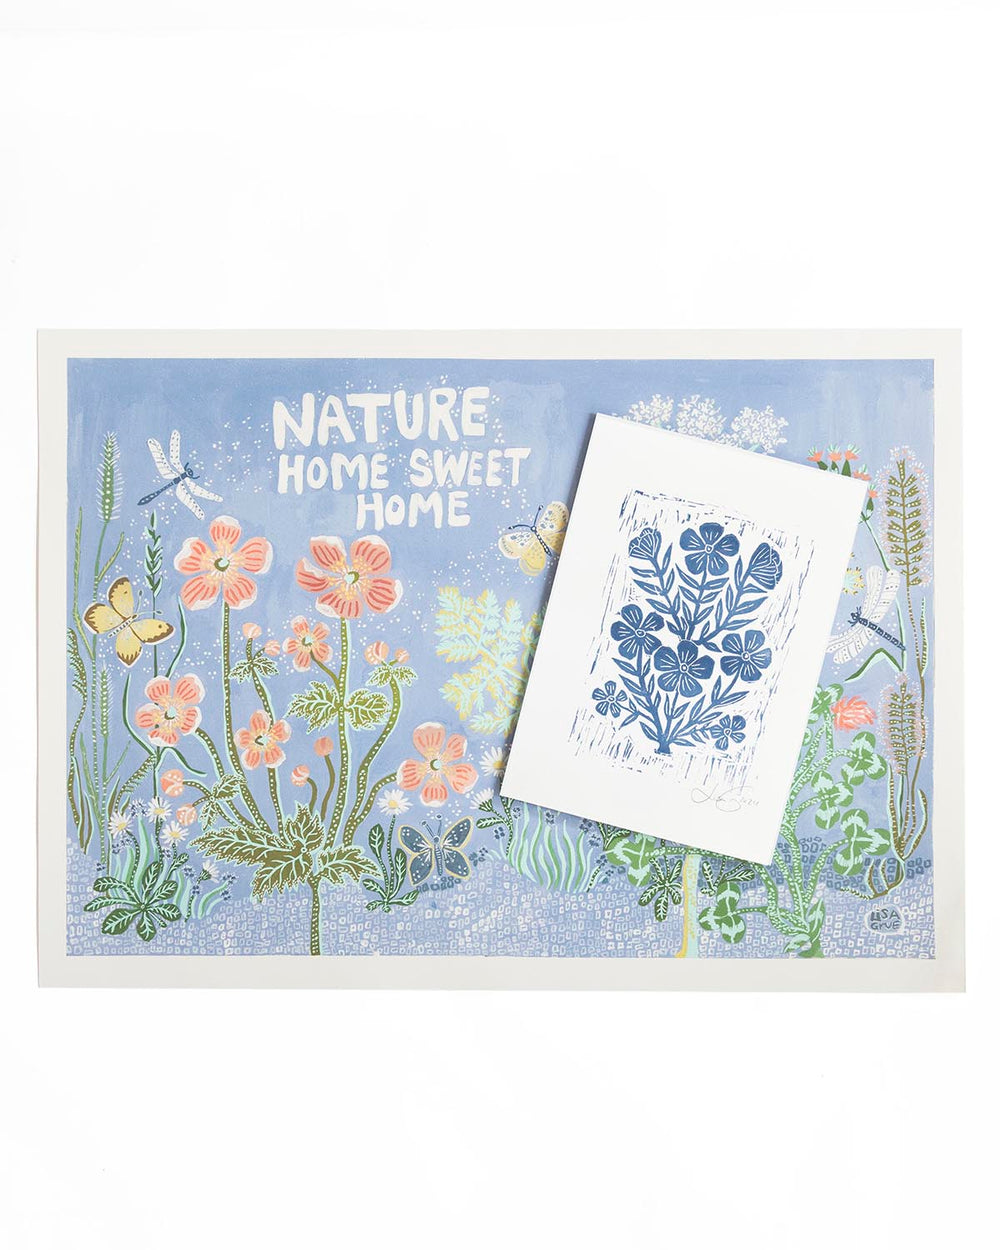 Nature - Home sweet home - Incl linoleum tryk